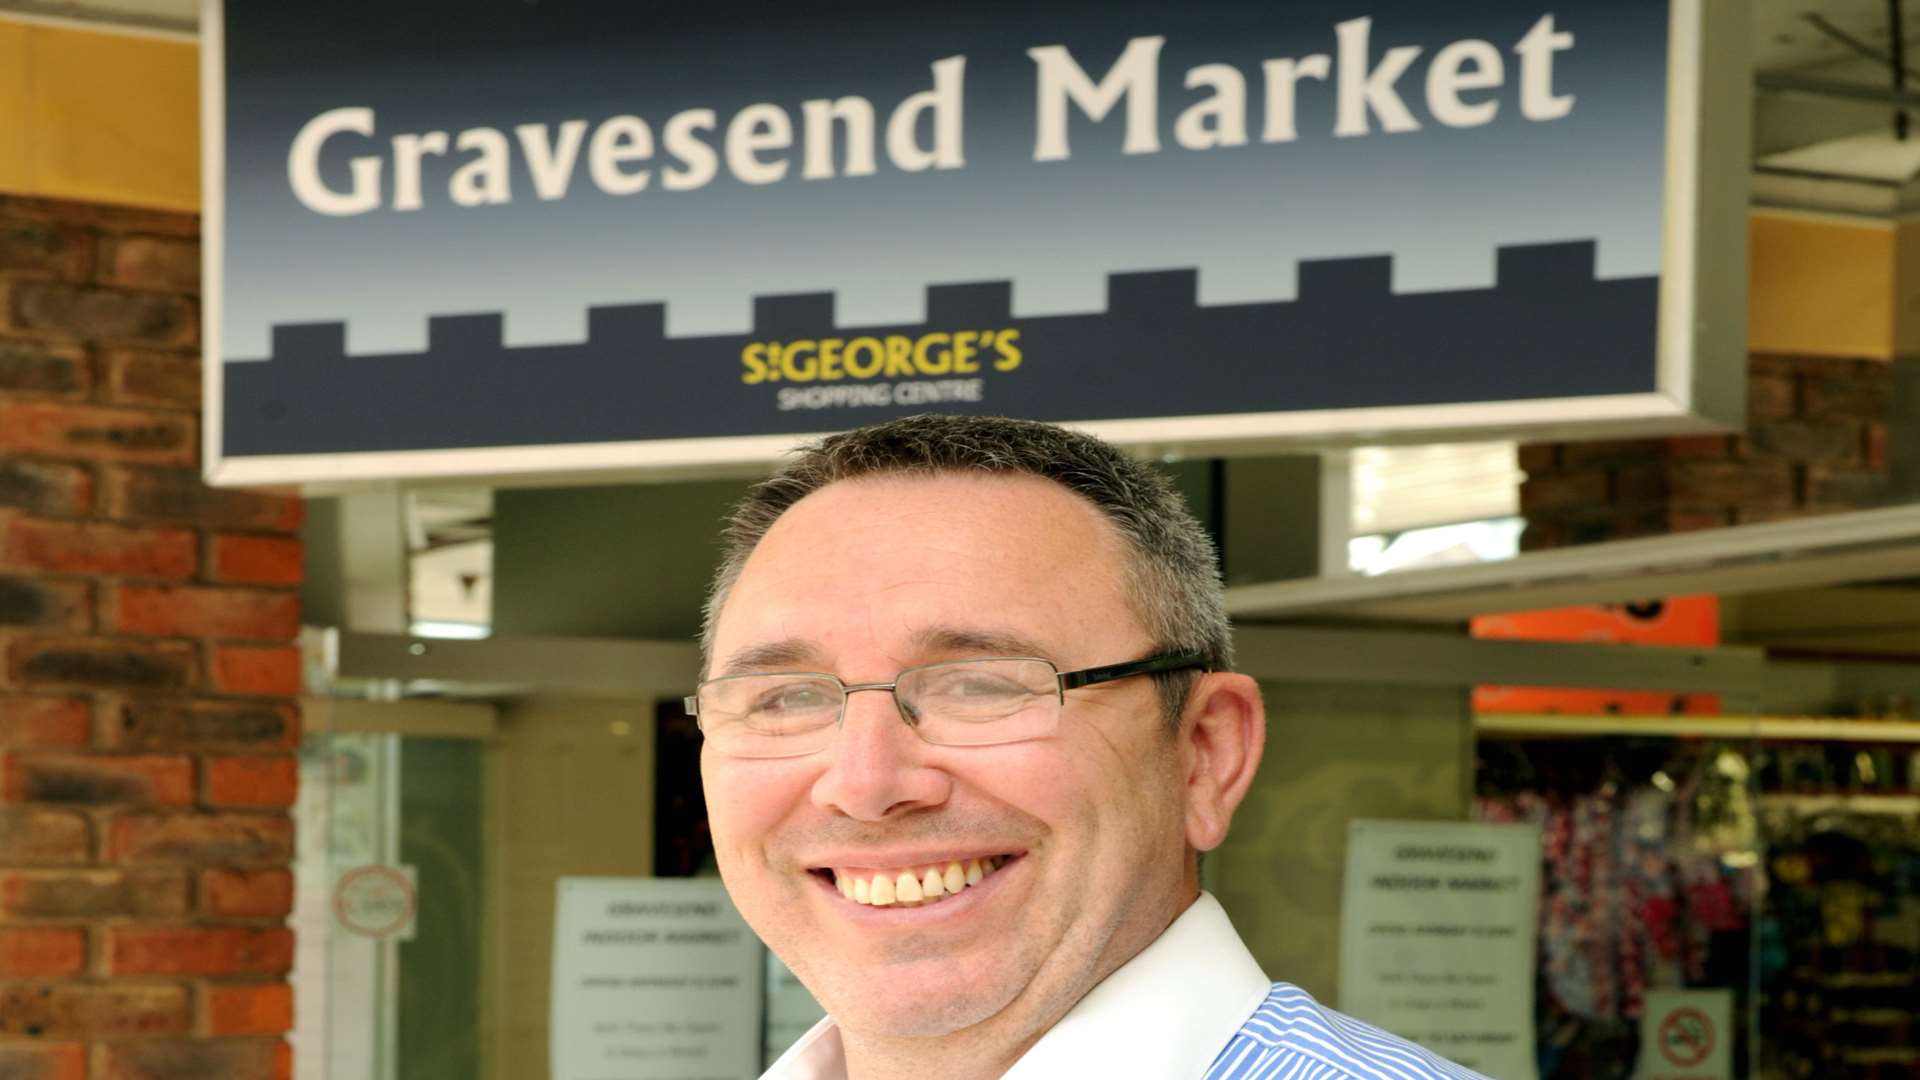 Andrew Thomas-Knowles said he was happy to help out the traders